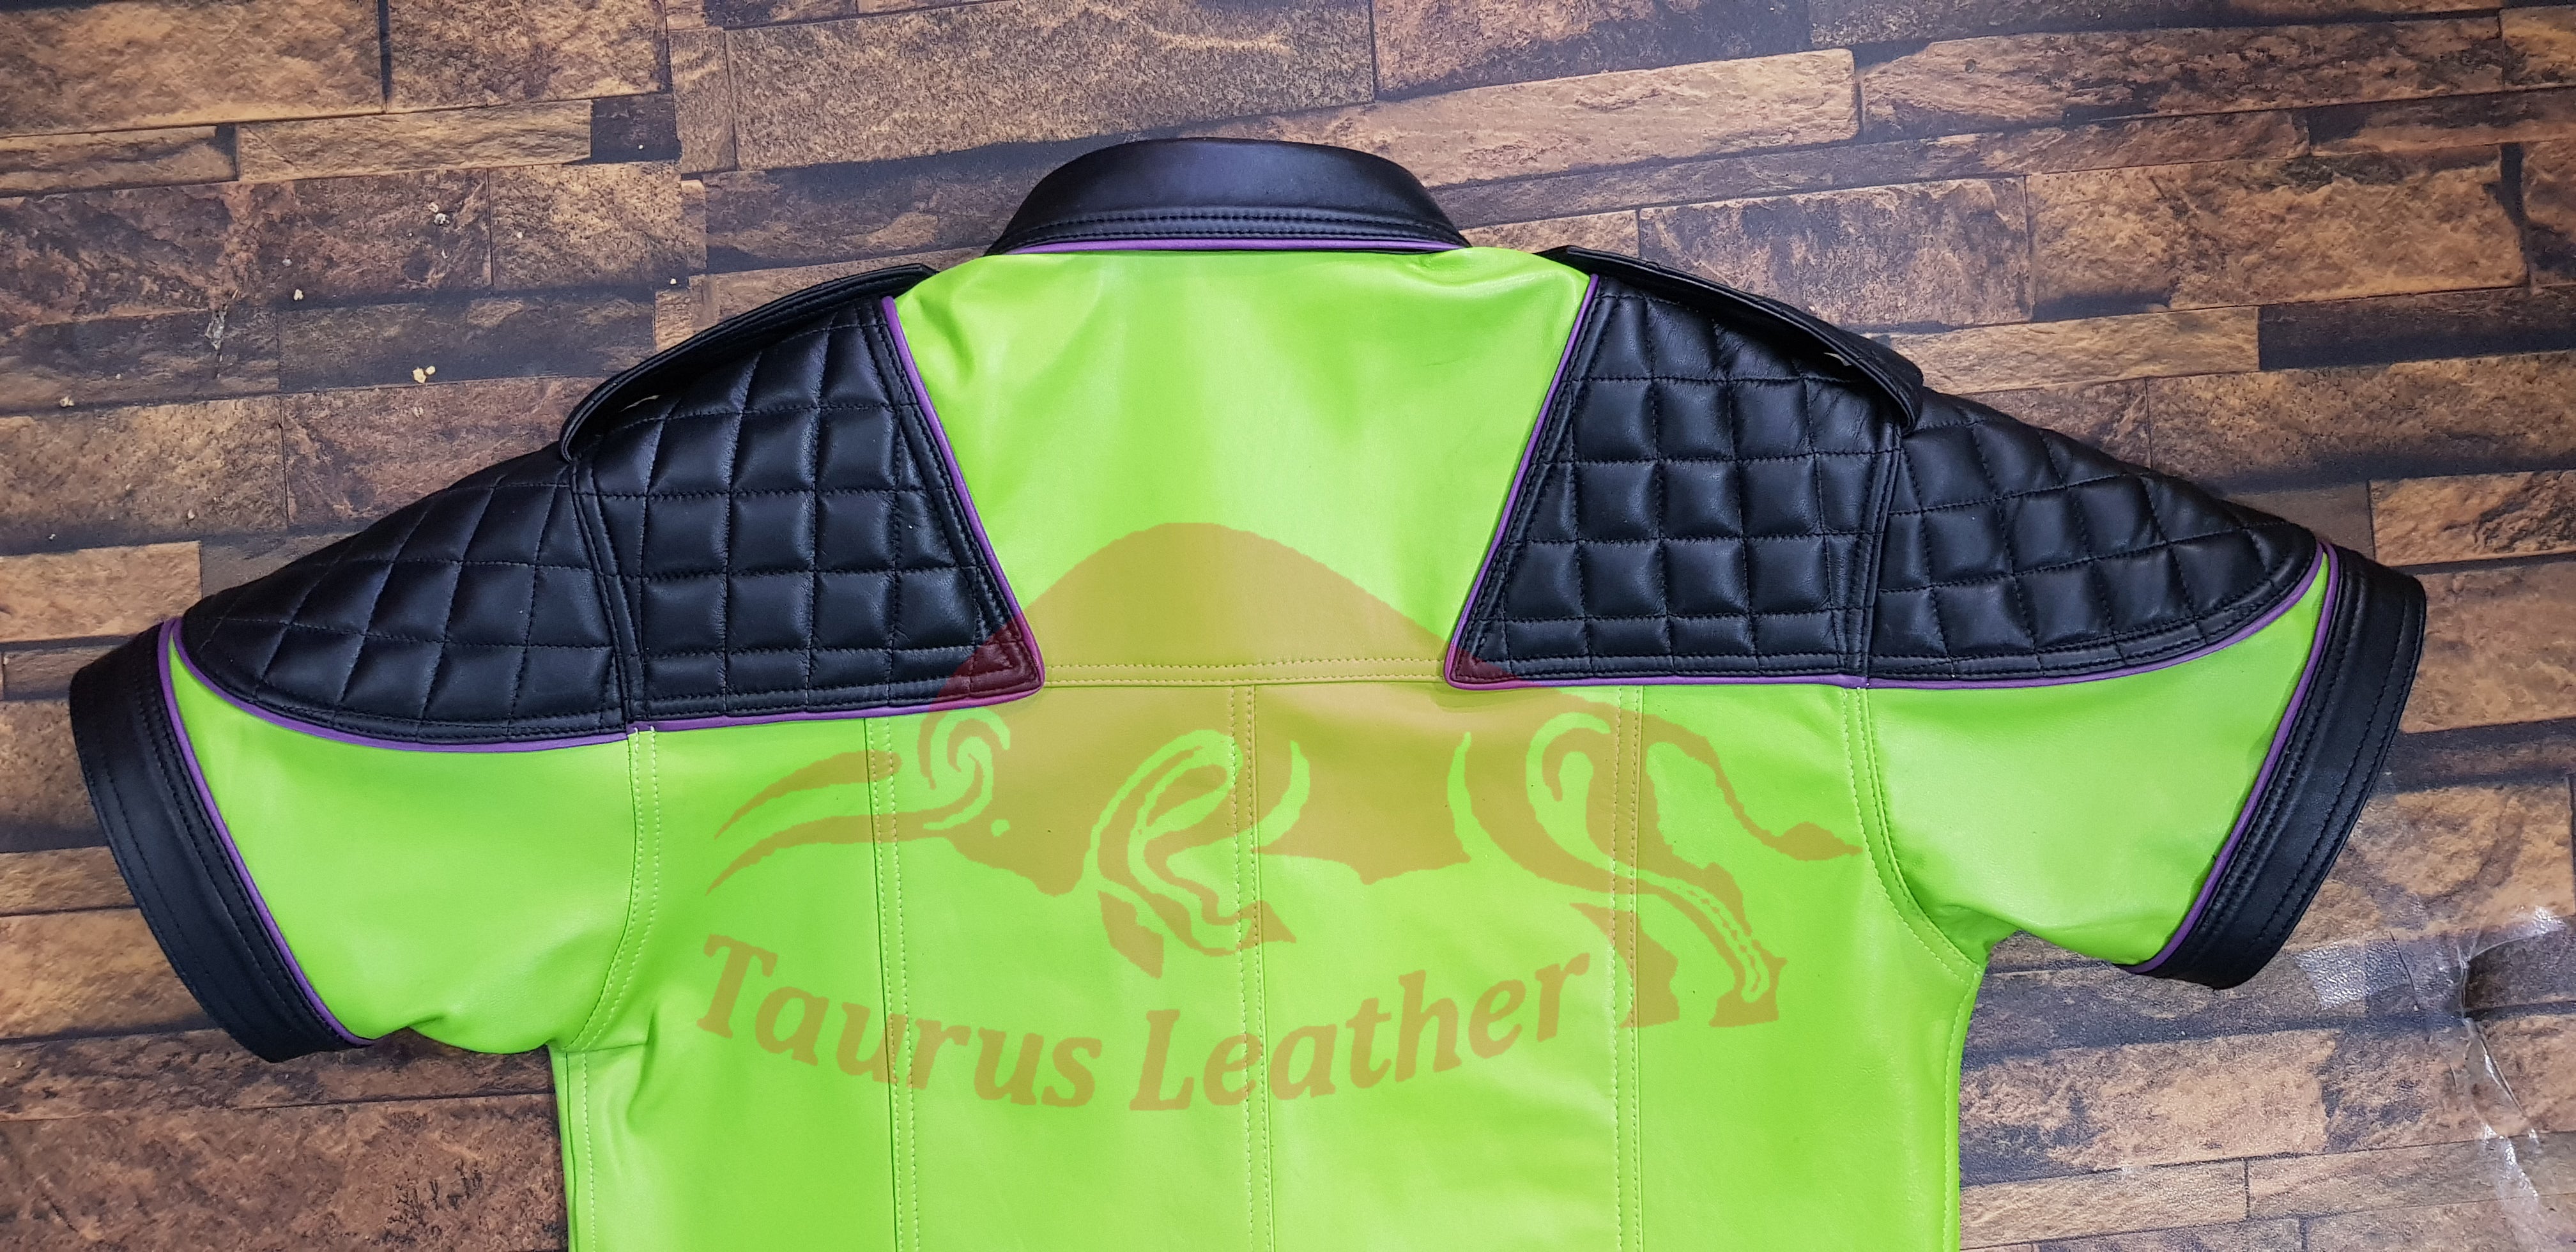 TAURUS LEATHER Lime Green Sheep Leather Shirt With Black Contrast And Purple Trimming